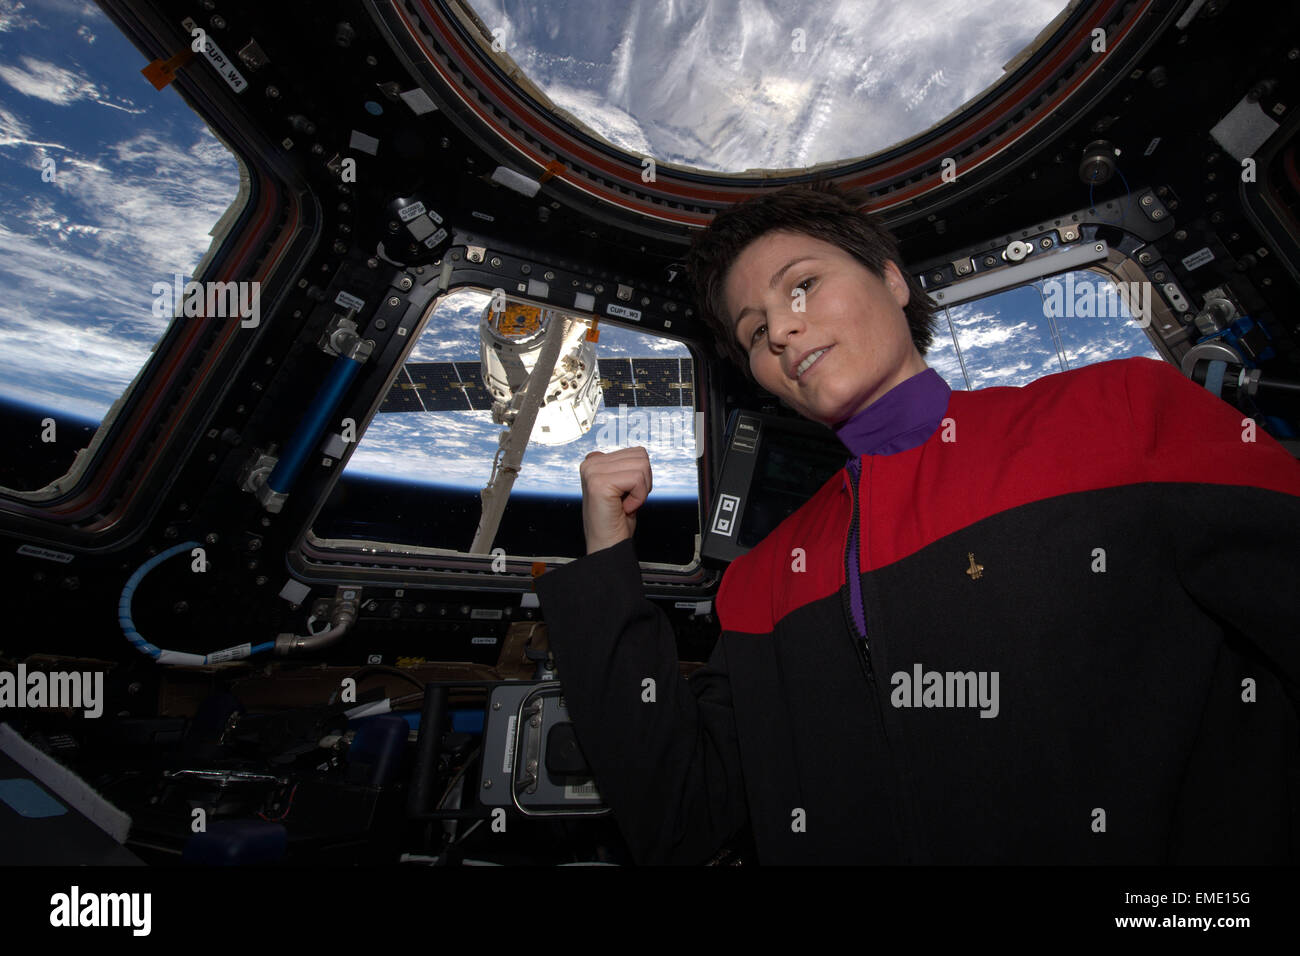 International Space Station Expedition 42 European Space Agency Astronaut Samantha Cristoforetti points to the SpaceX Dragon capsule after grabbing the spacecraft using the Canadarm robotic arm from inside the copula April 17, 2015 in Earth Orbit. Stock Photo